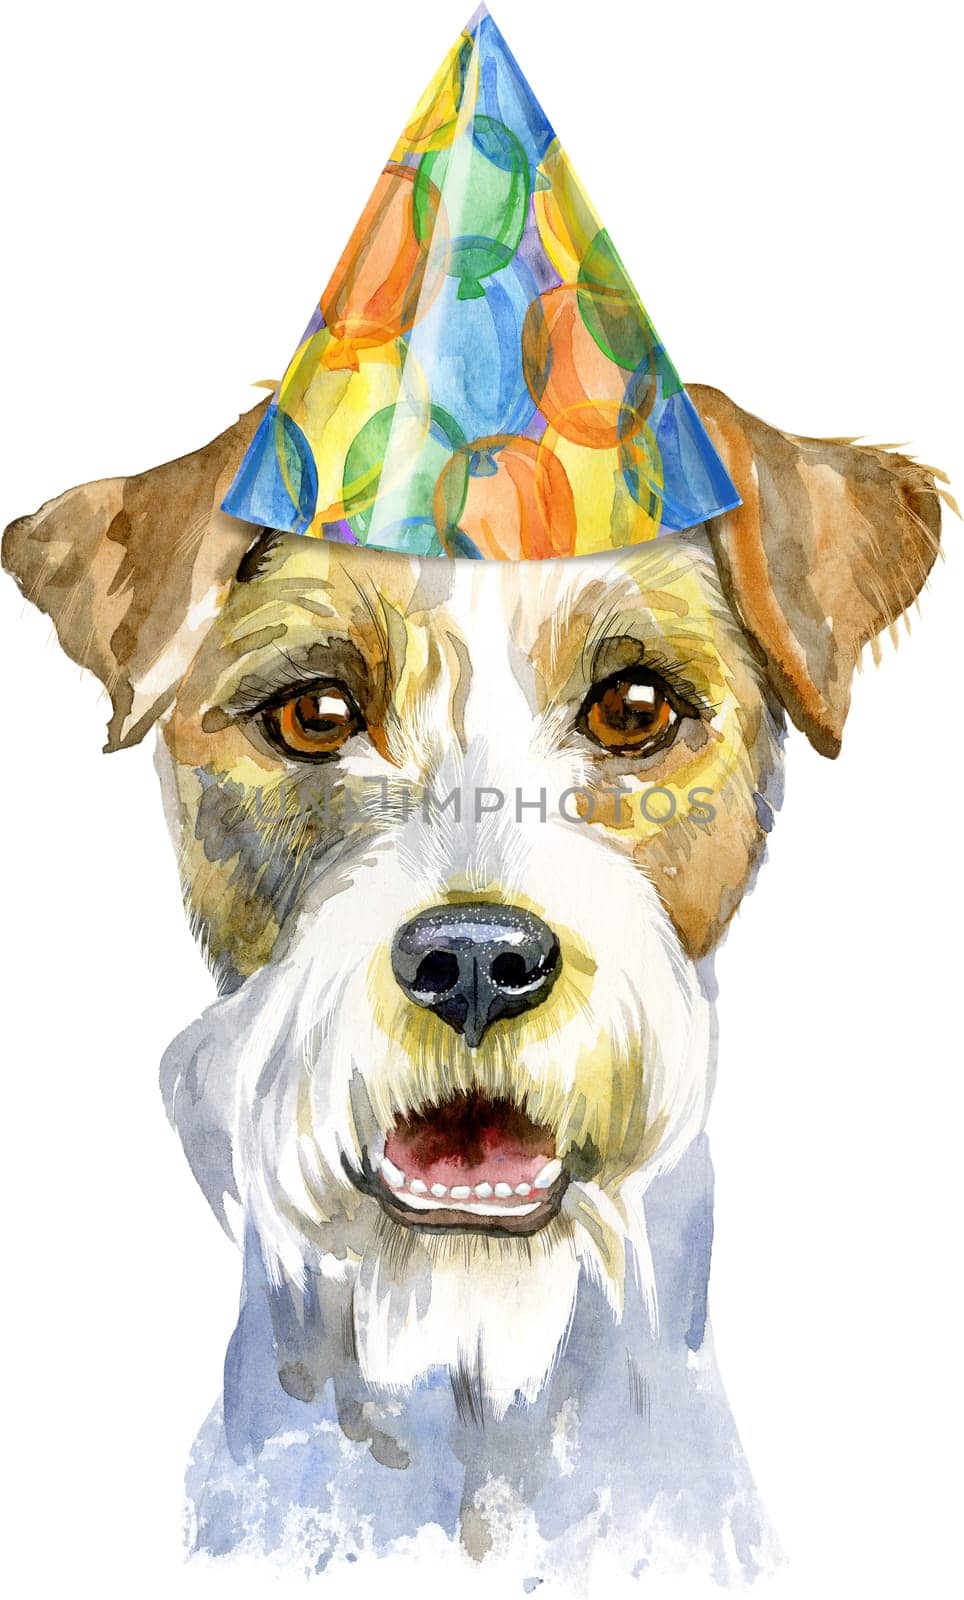 Watercolor portrait of airedale terrier dog in party hat by NataOmsk